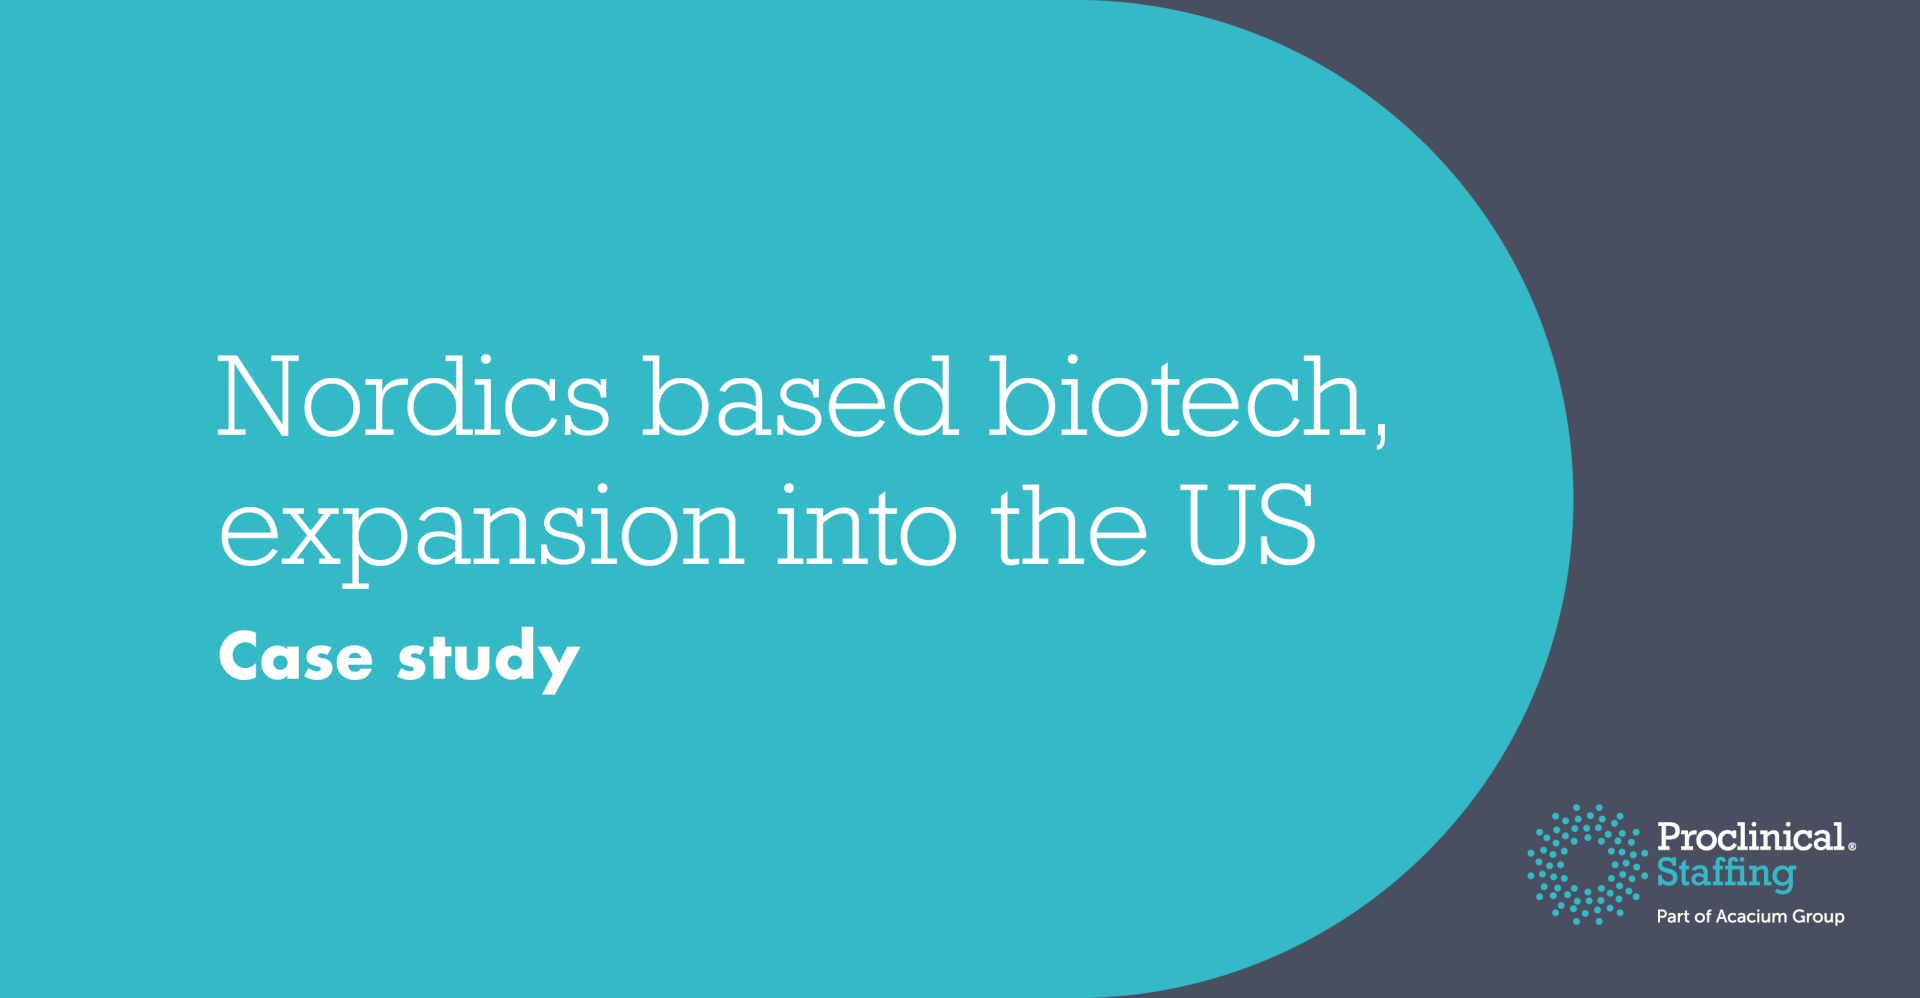 Nordics based biotech, expansion into the US